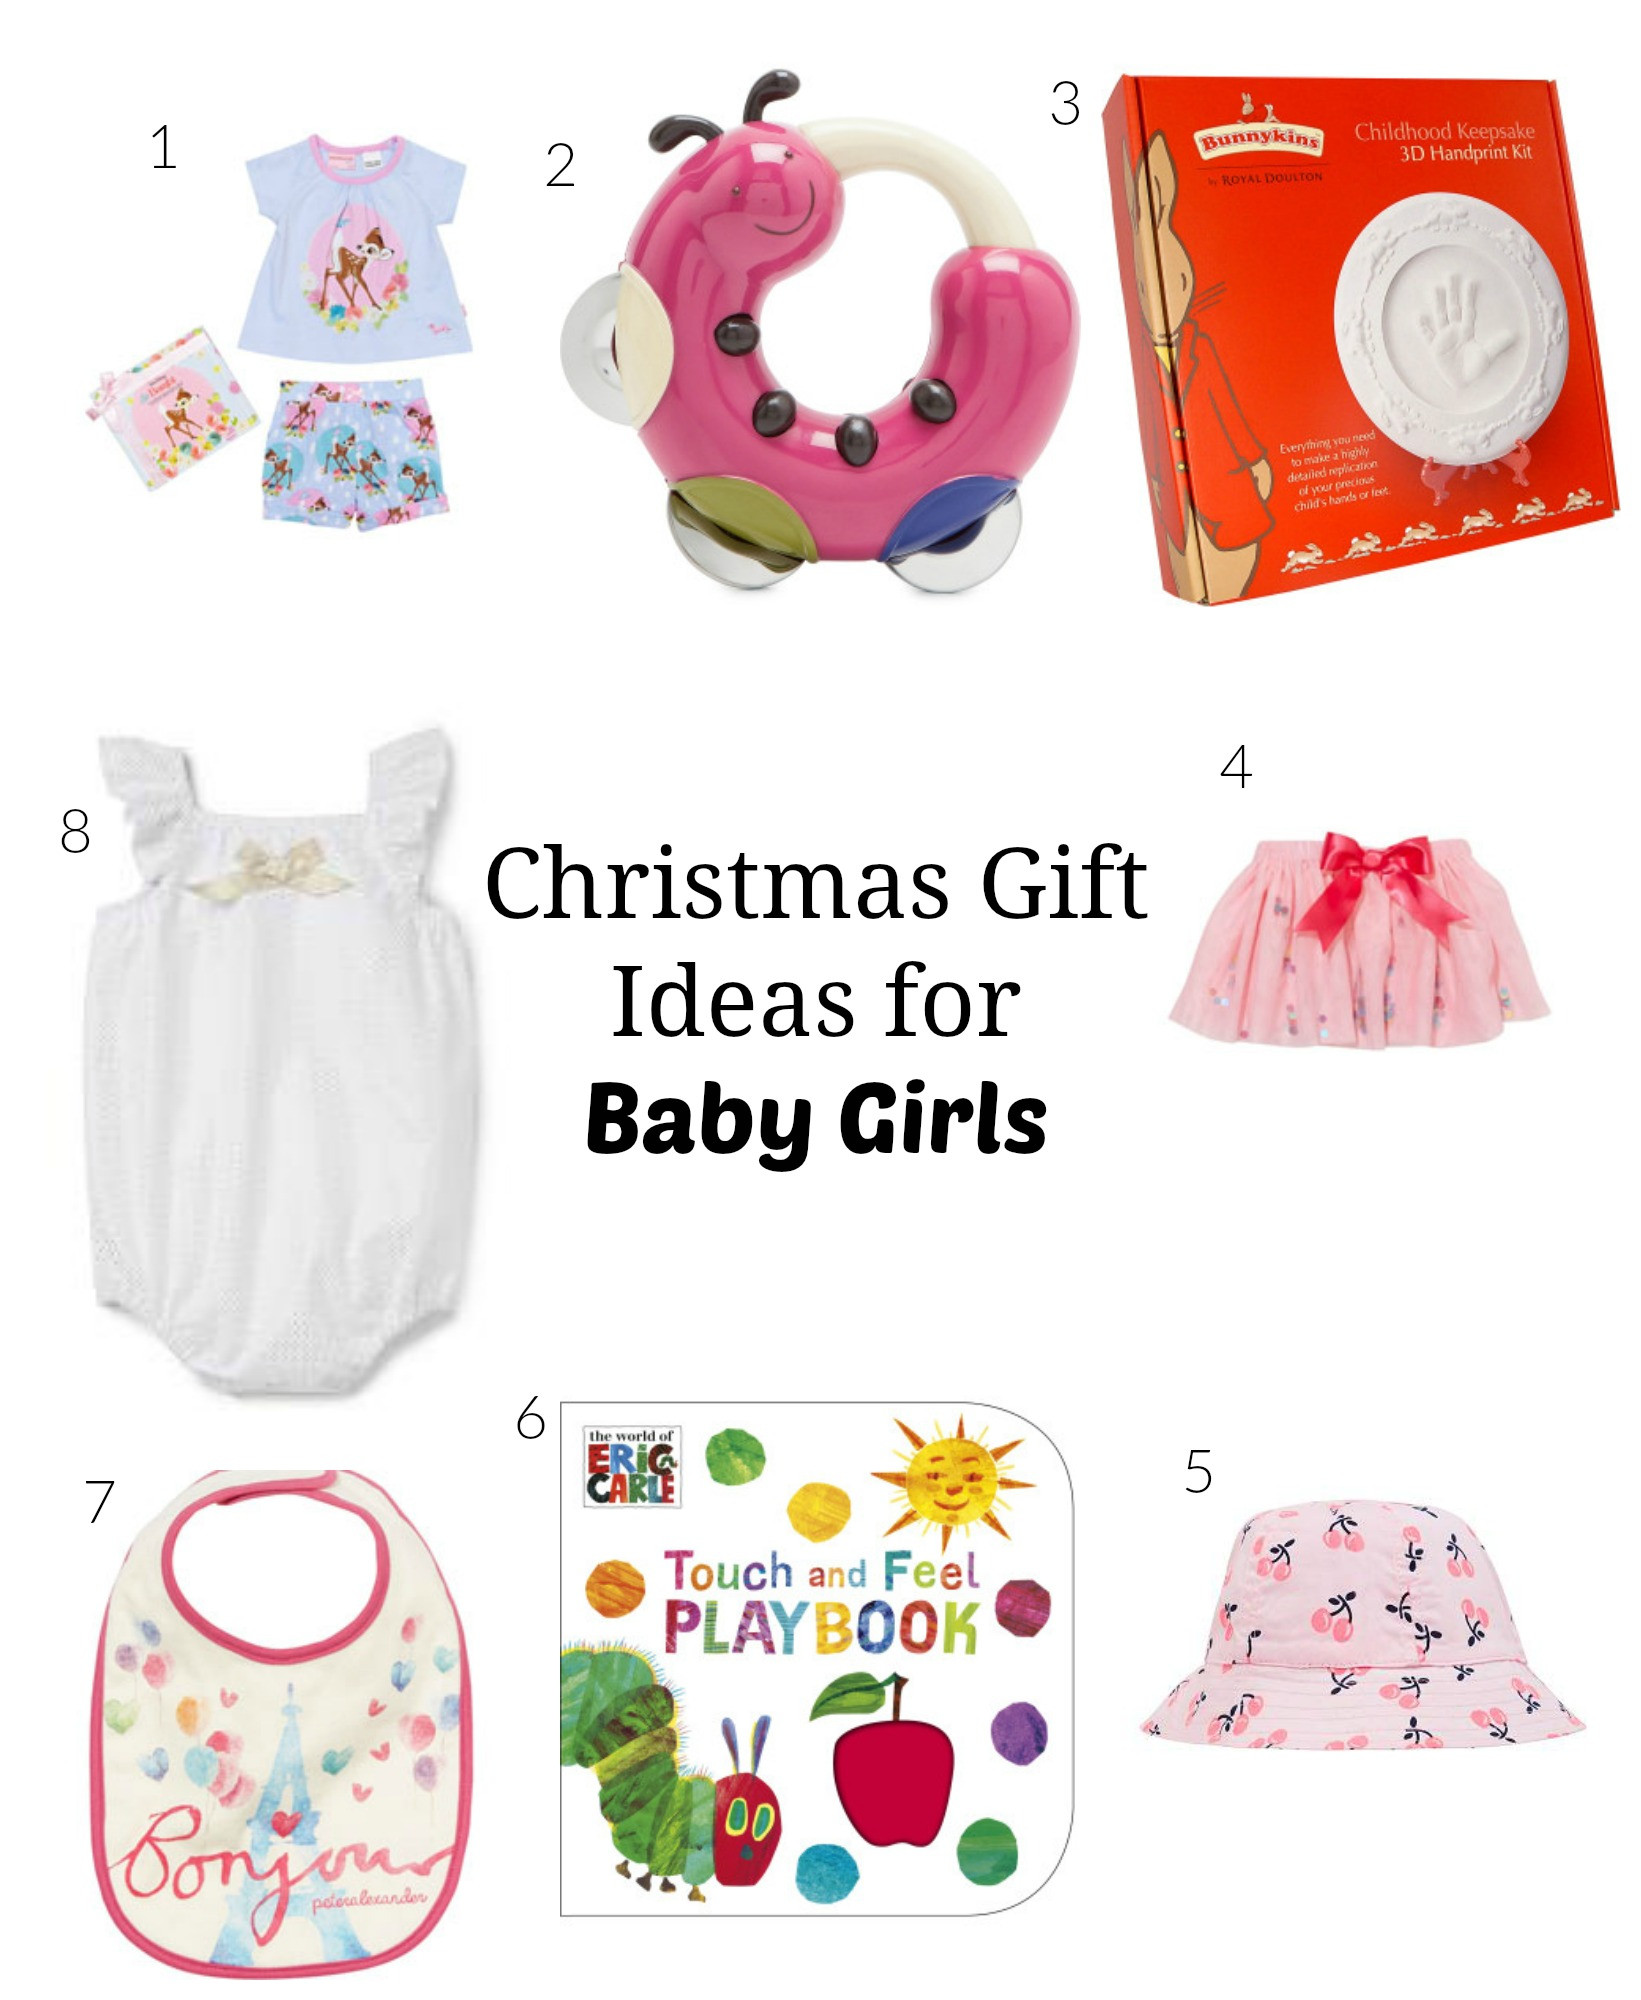 Christmas Gift Ideas From Baby
 Go Ask Mum Christmas Gifts for Baby Girls Under $40 Go